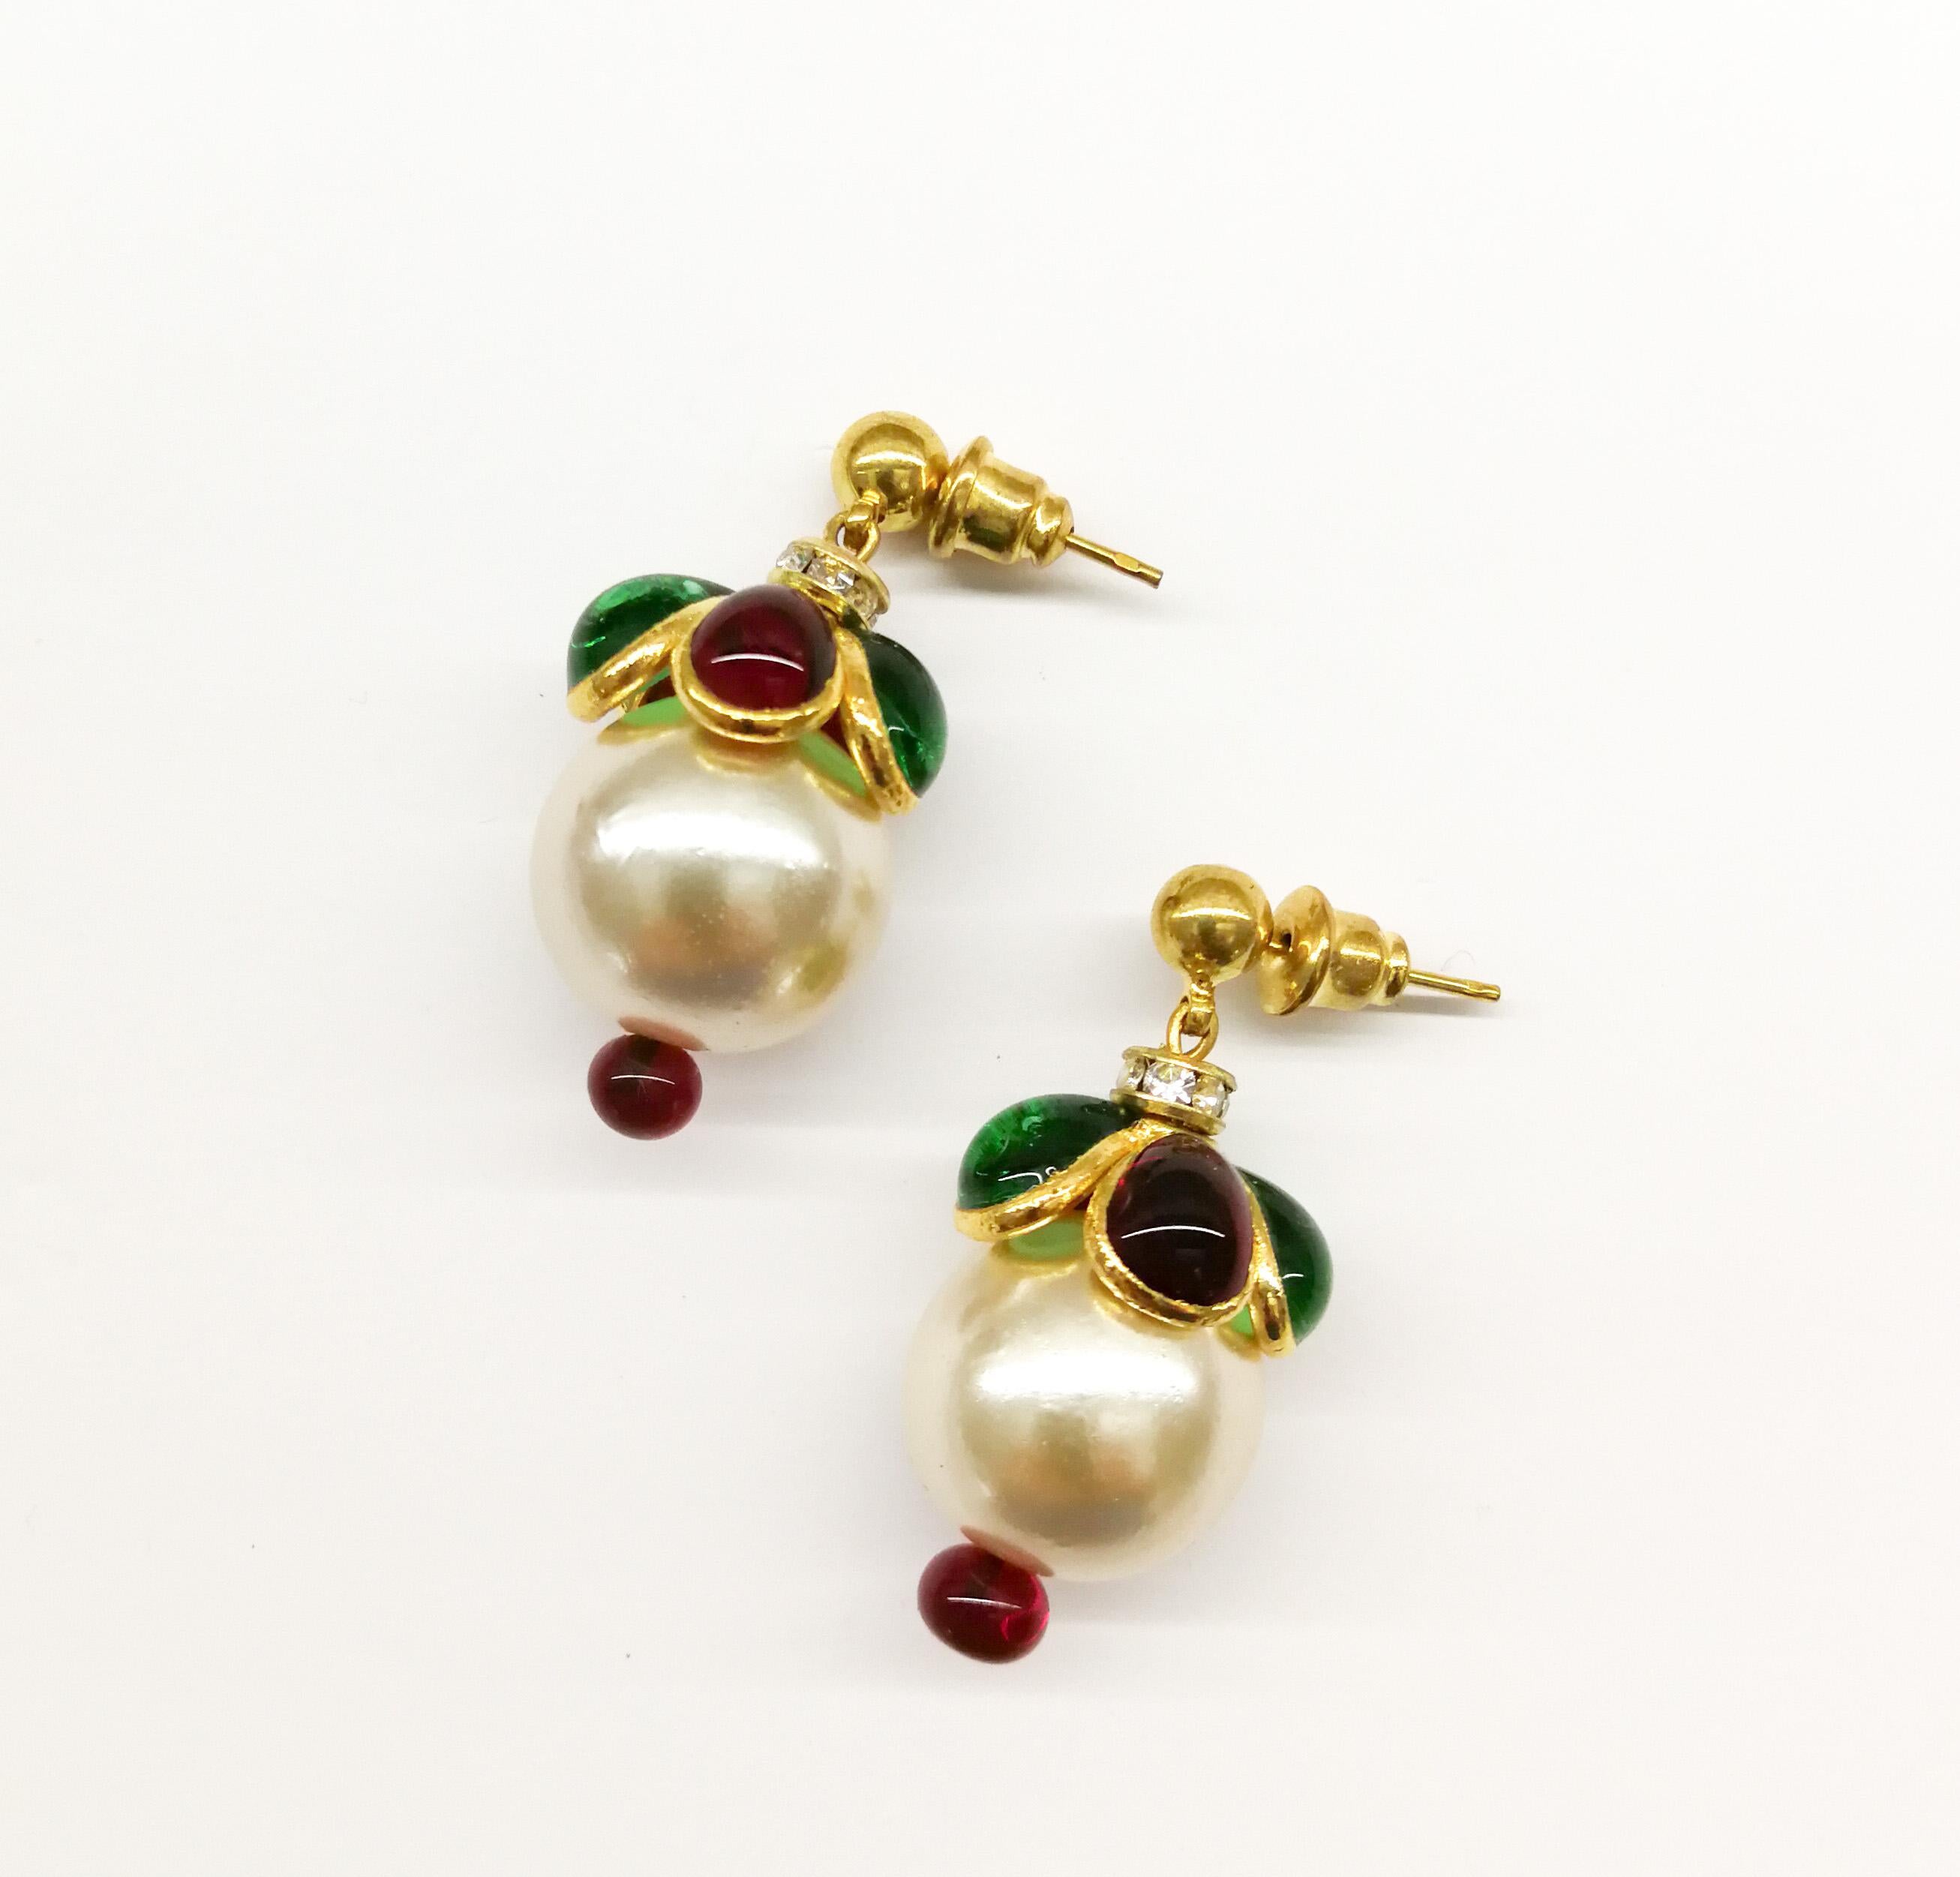 Delicate and delightful drop gilt earrings, with a cream lustre pearl, capped in ruby and emerald poured glass petals, with a ruby poured glass bead underneath the pearl to highlight and finish off. Light and easy to wear, perfect for a wedding